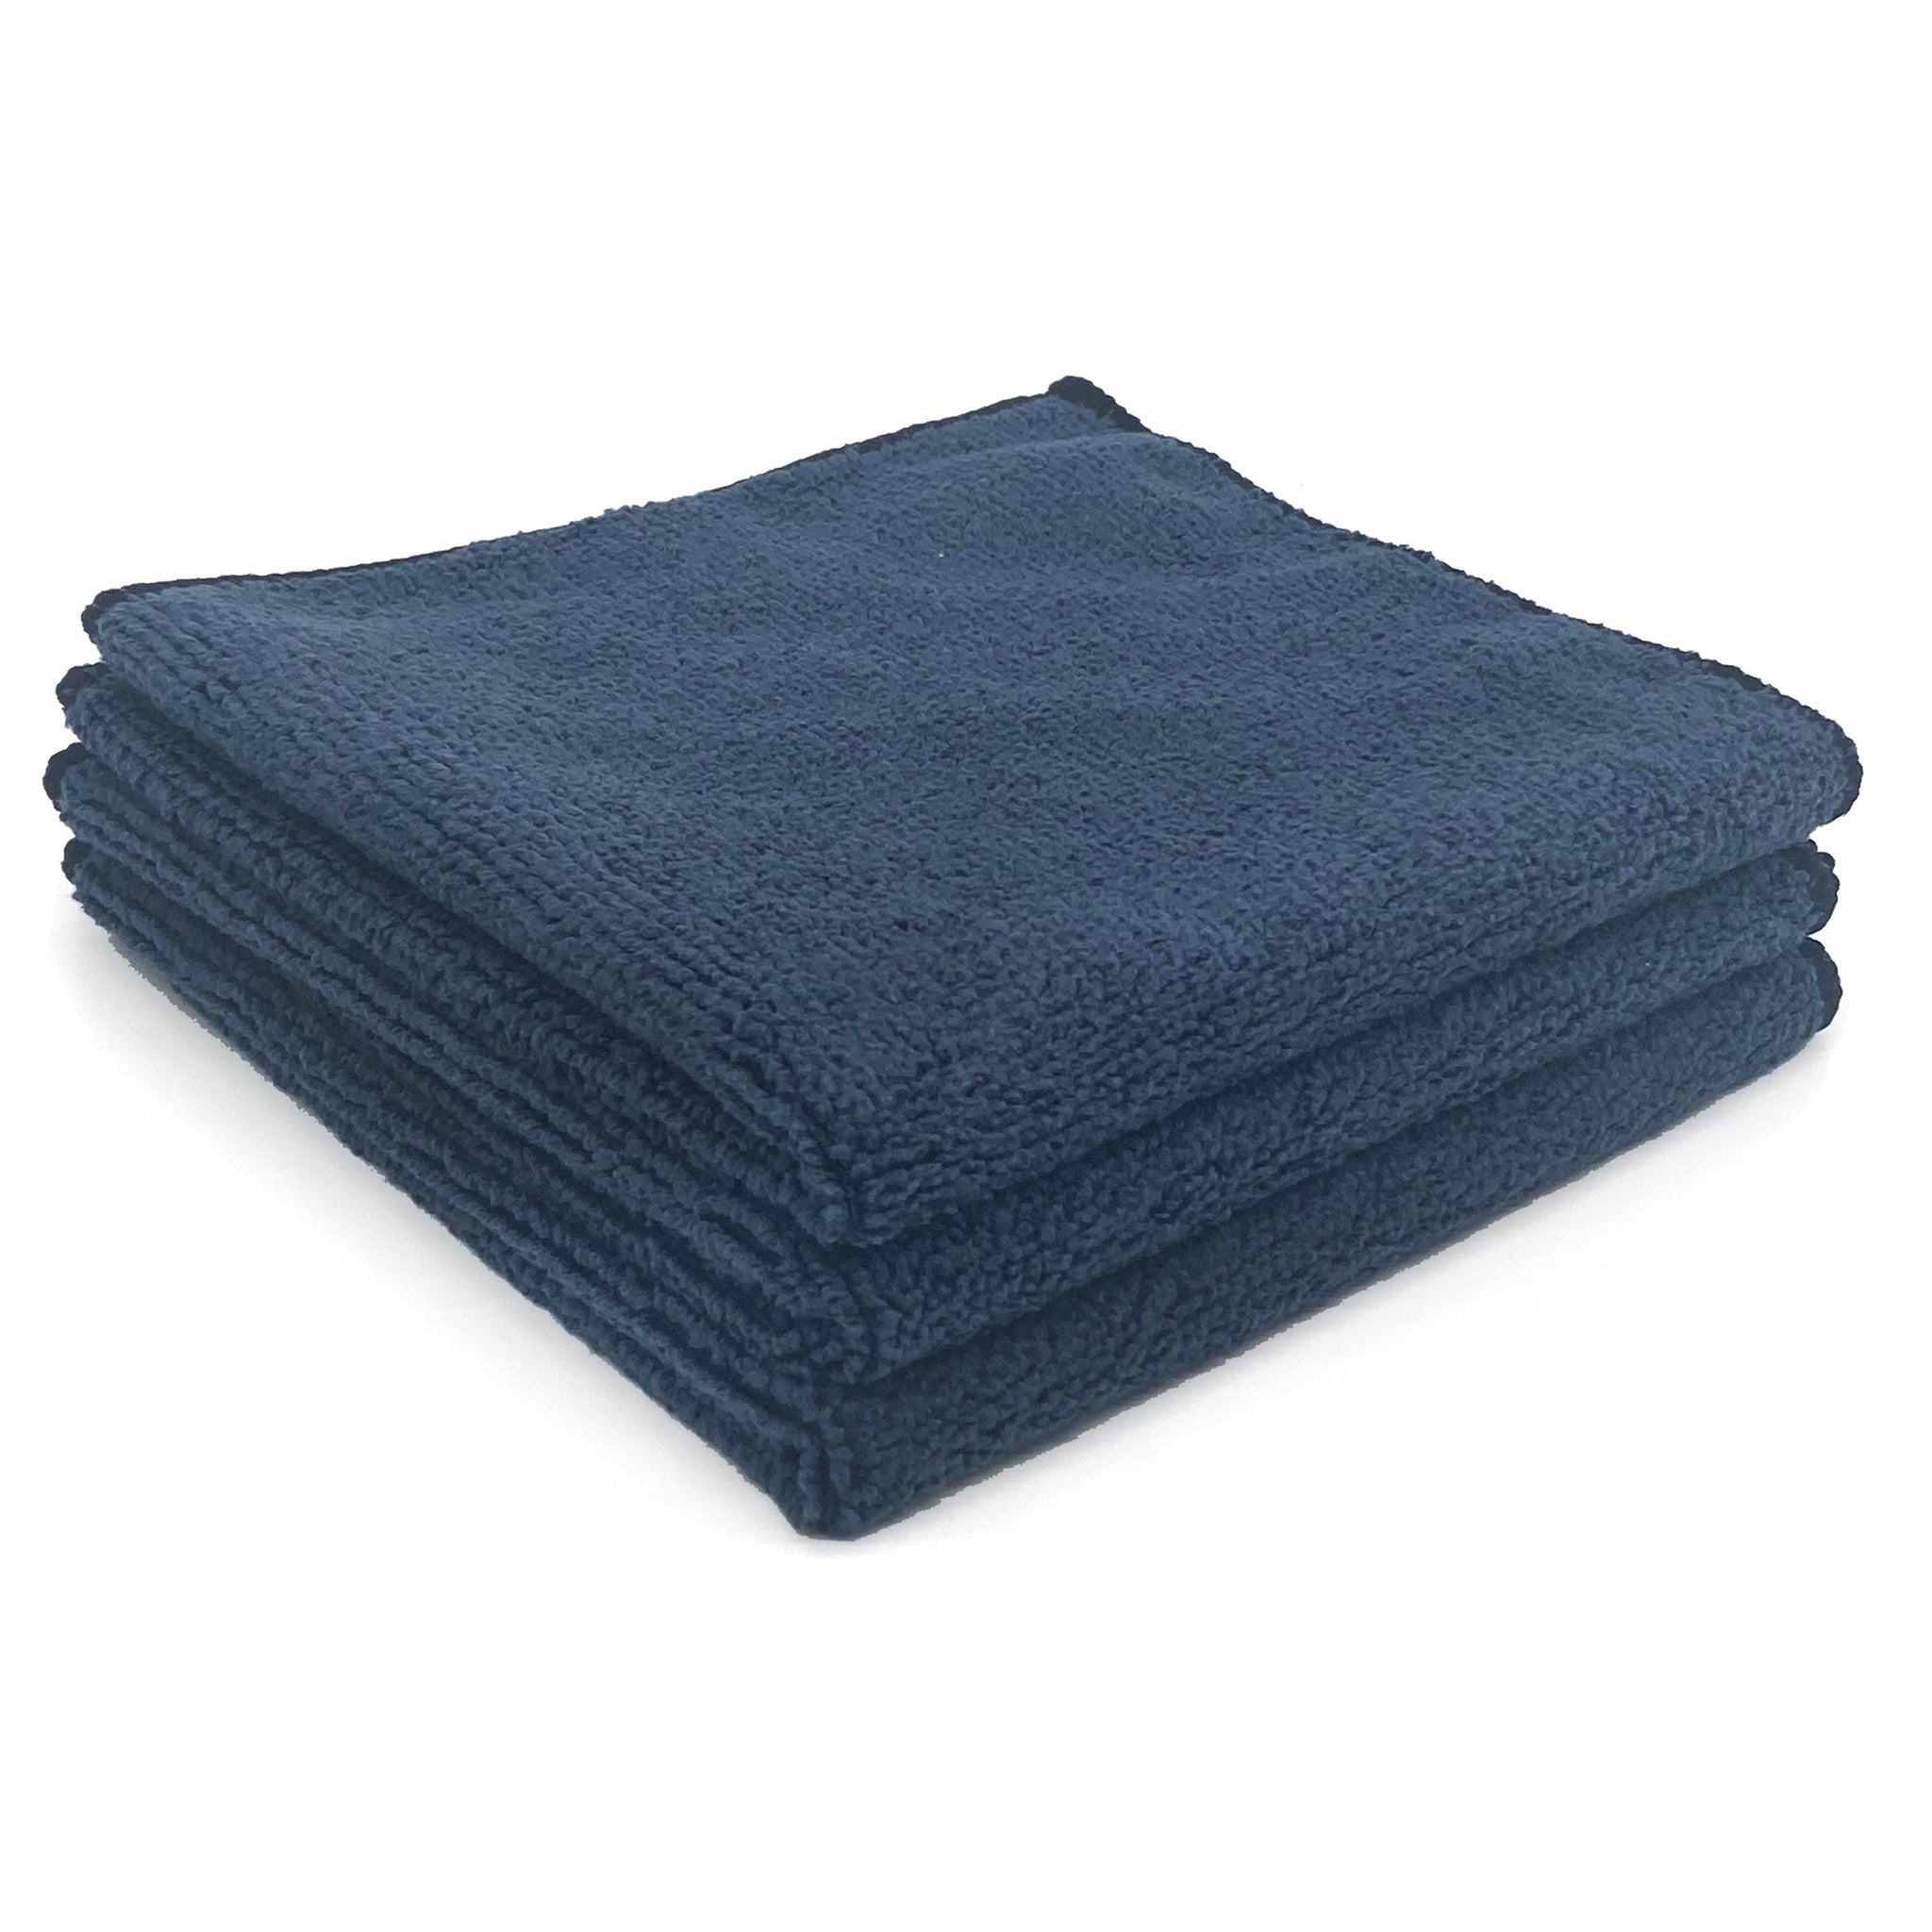 Microfiber Record Cleaning Towels (3-Pack)